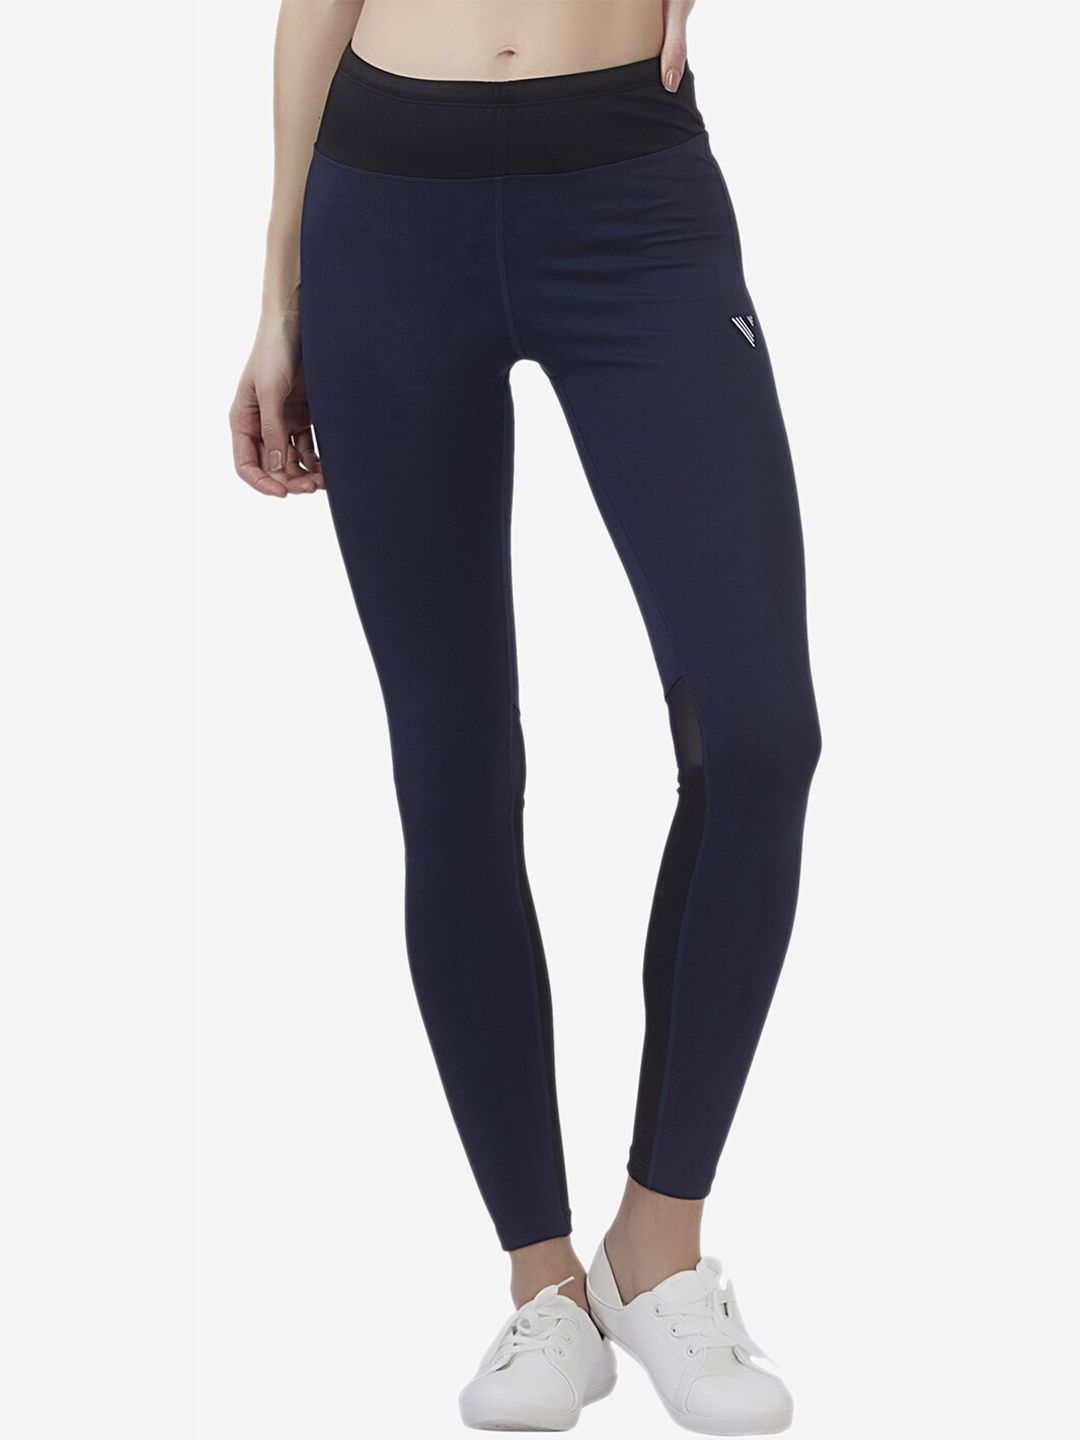 VELOZ Women Navy Blue Solid Tights Price in India